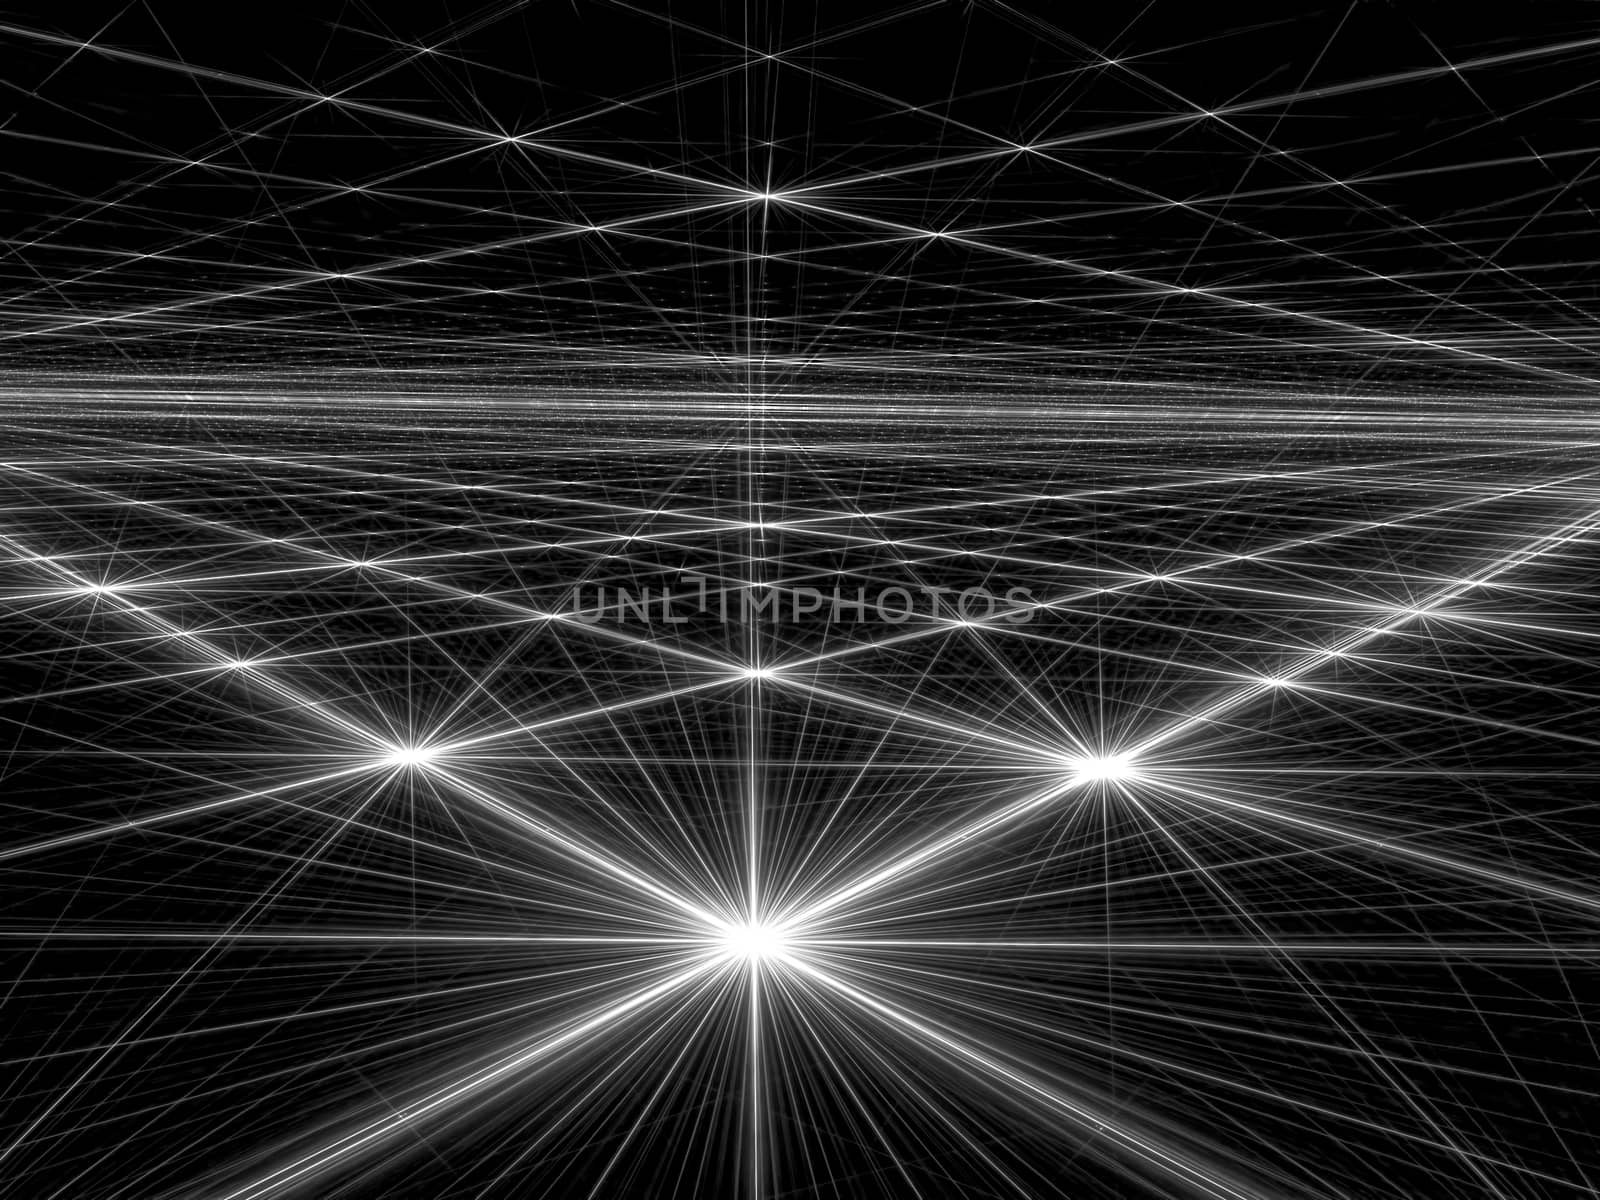 Abstract bright background - computer-generated image. Fractal geometry: bright stars and grid. Technology or space background for creative design projects.